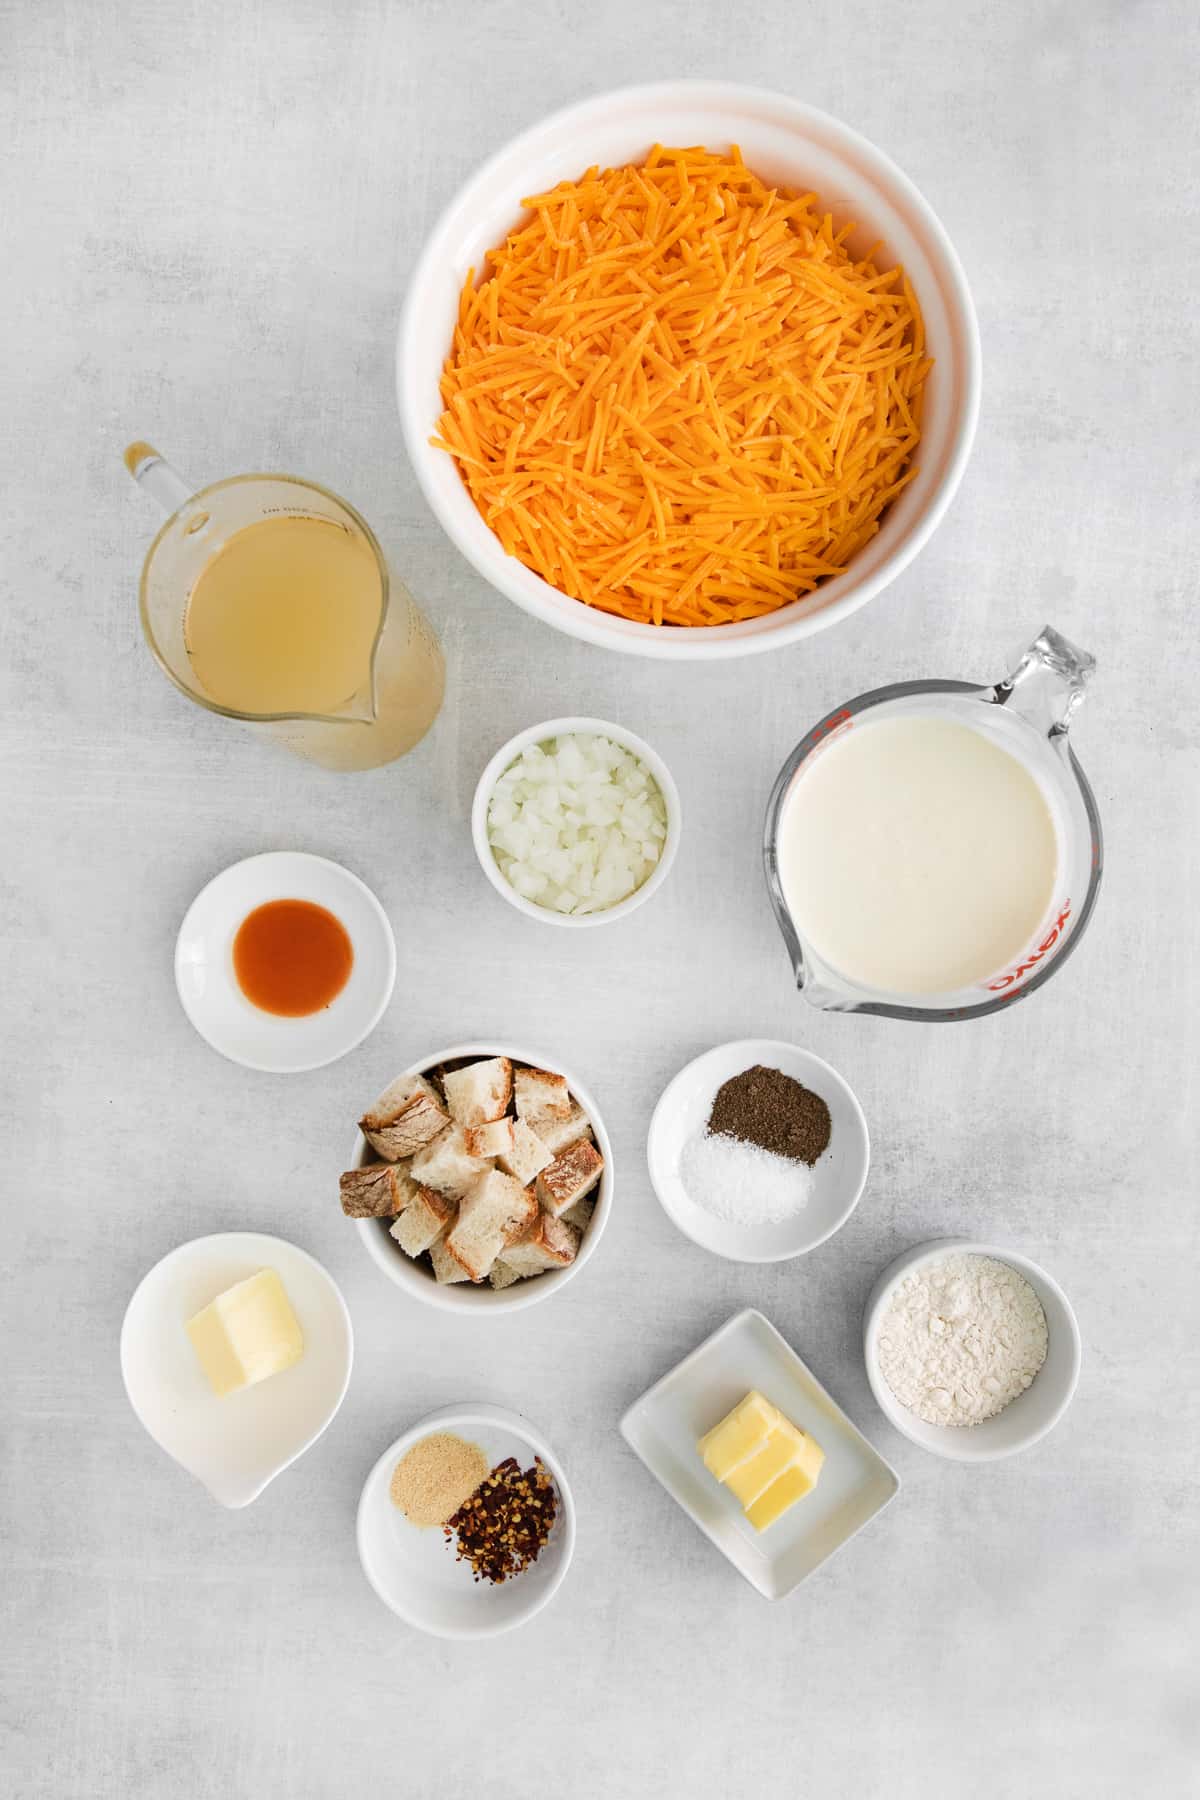 Ingredients for cheddar cheese soup in bowls.